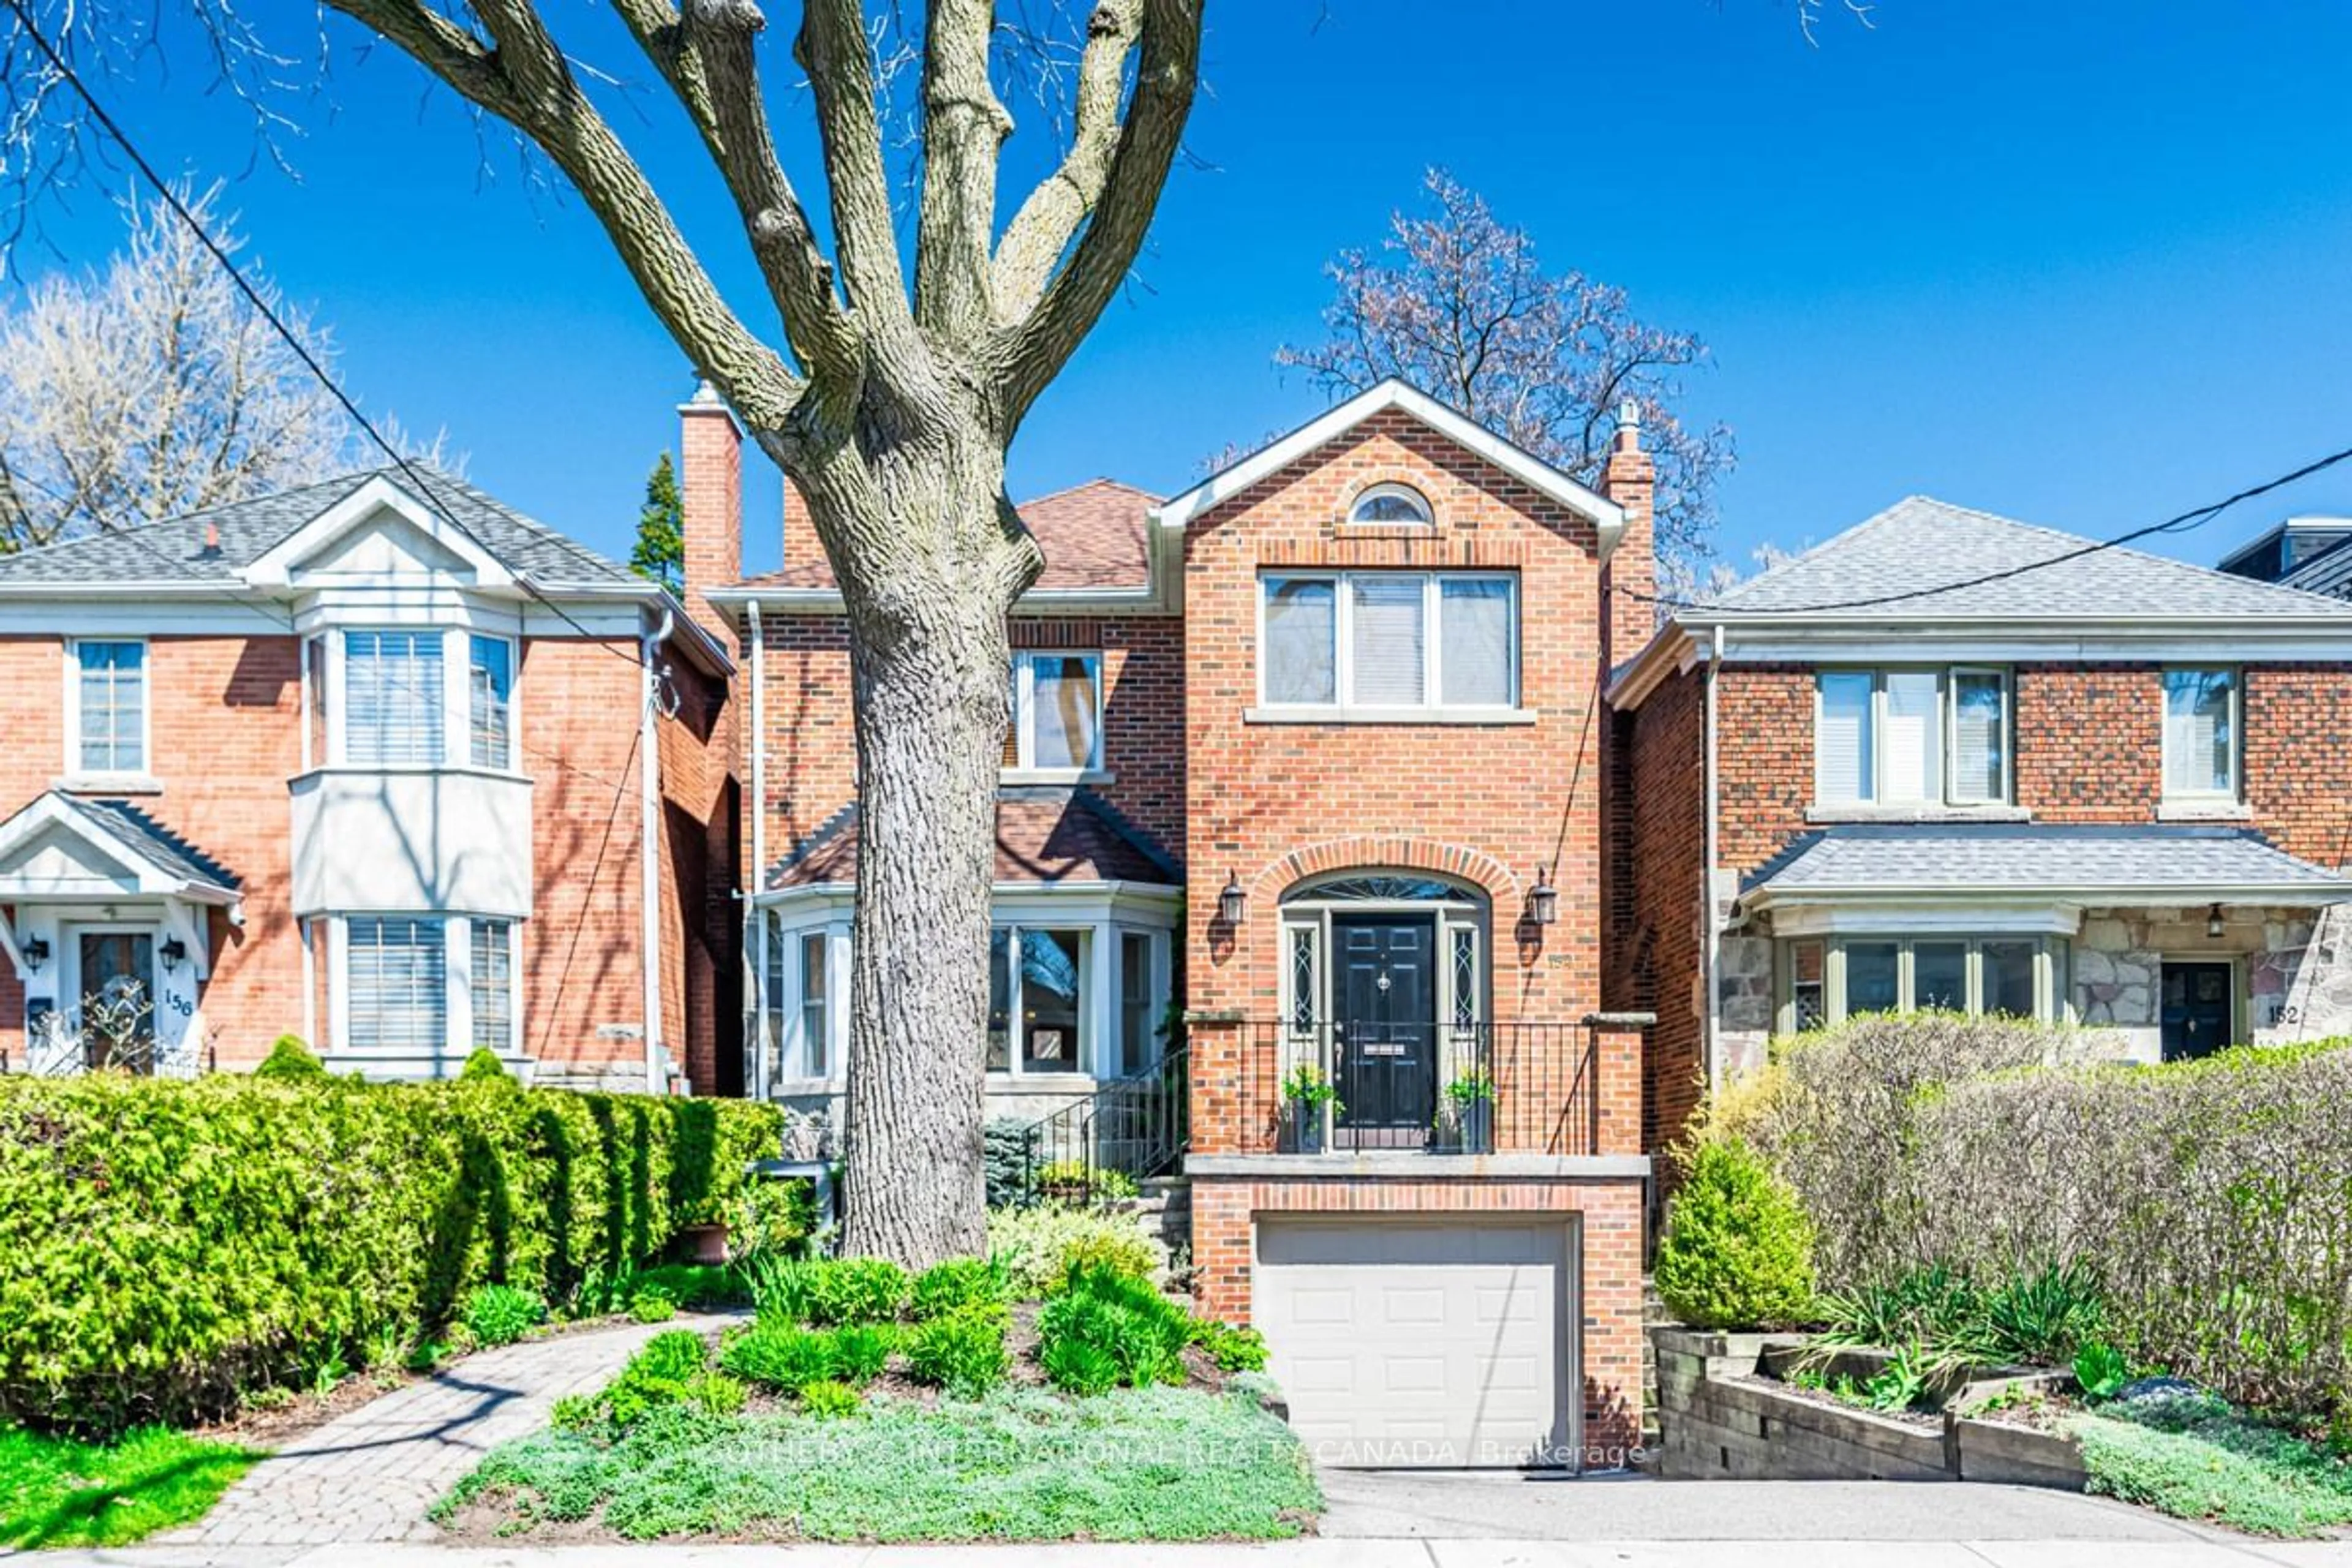 Home with brick exterior material for 154 Brooke Ave, Toronto Ontario M5M 2K5